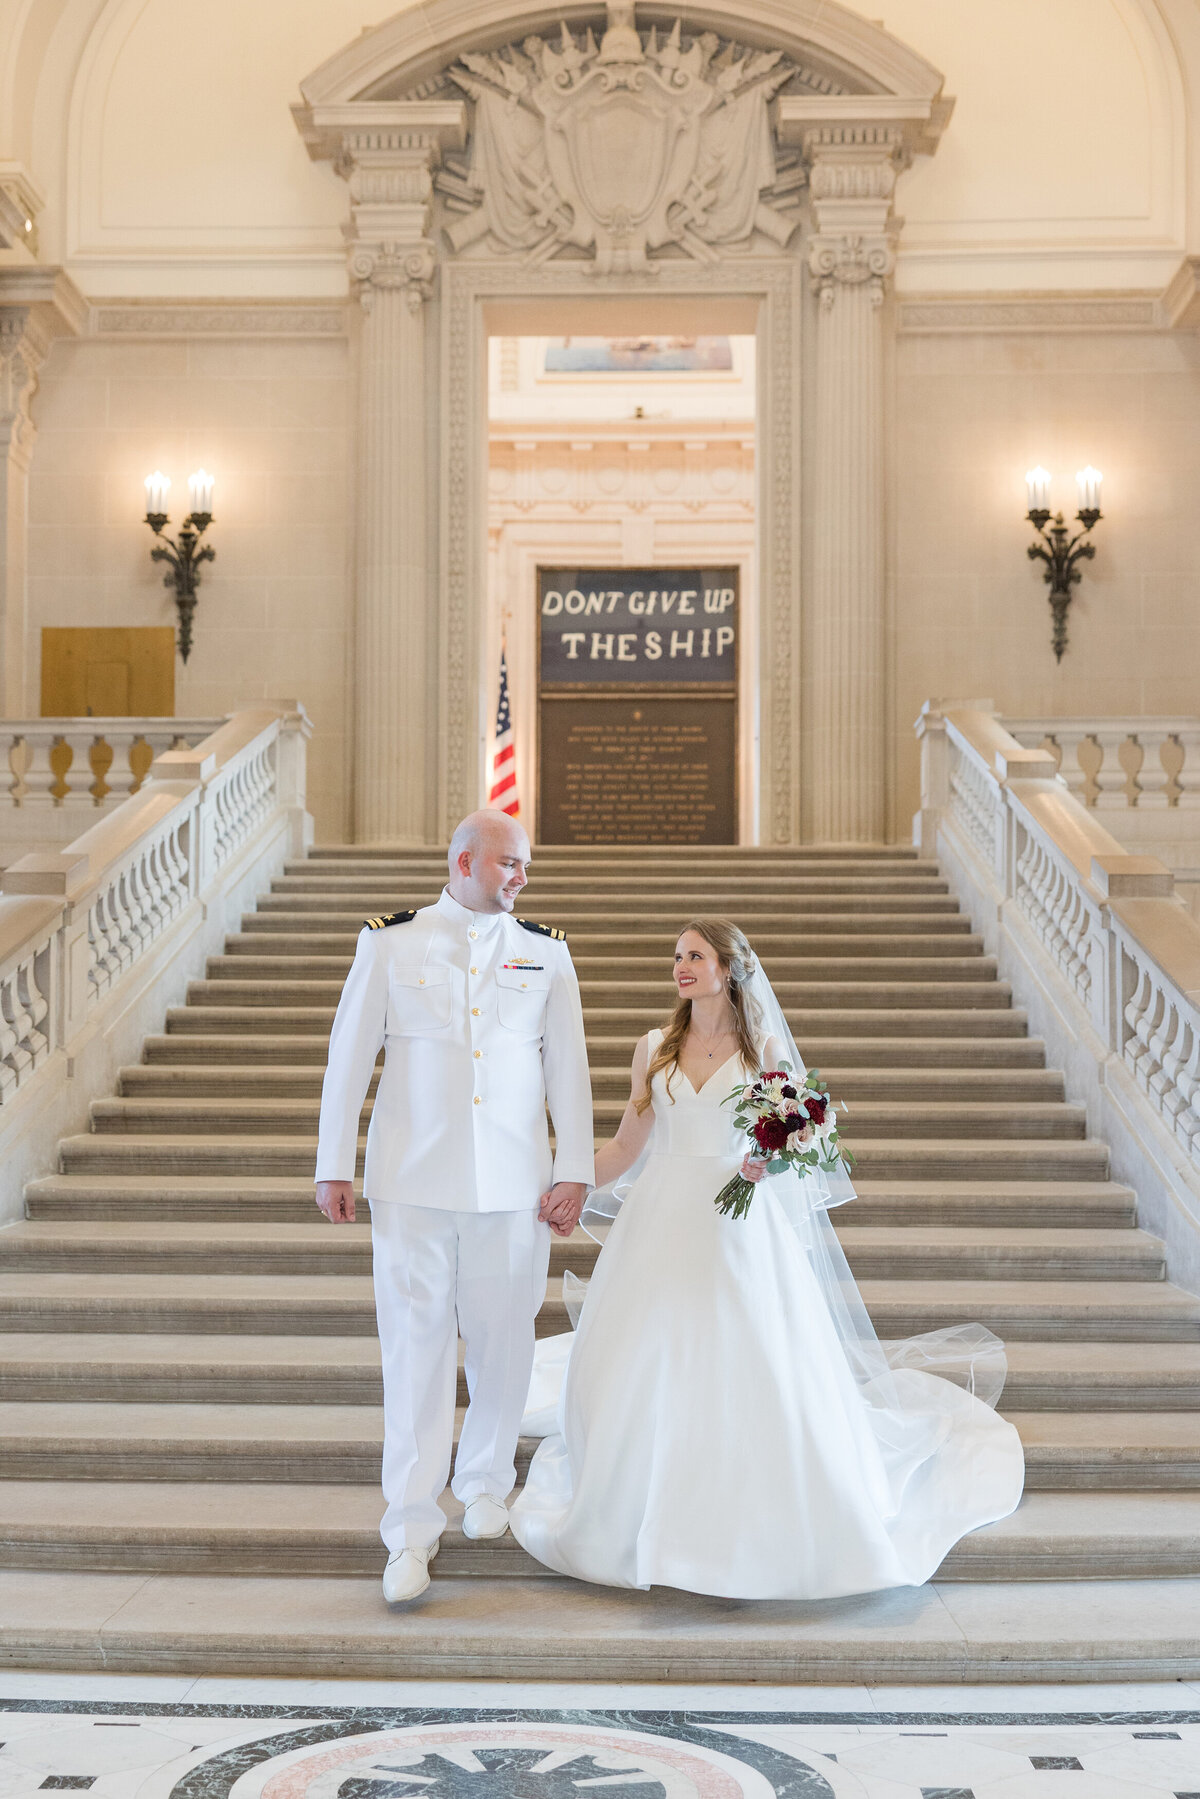 Naval Academy wedding in Annapolis, Maryland photo of bride and groom on step at Bancroft Memorial Hall with Don't Give Up The Ship sign by Christa Rae Photography